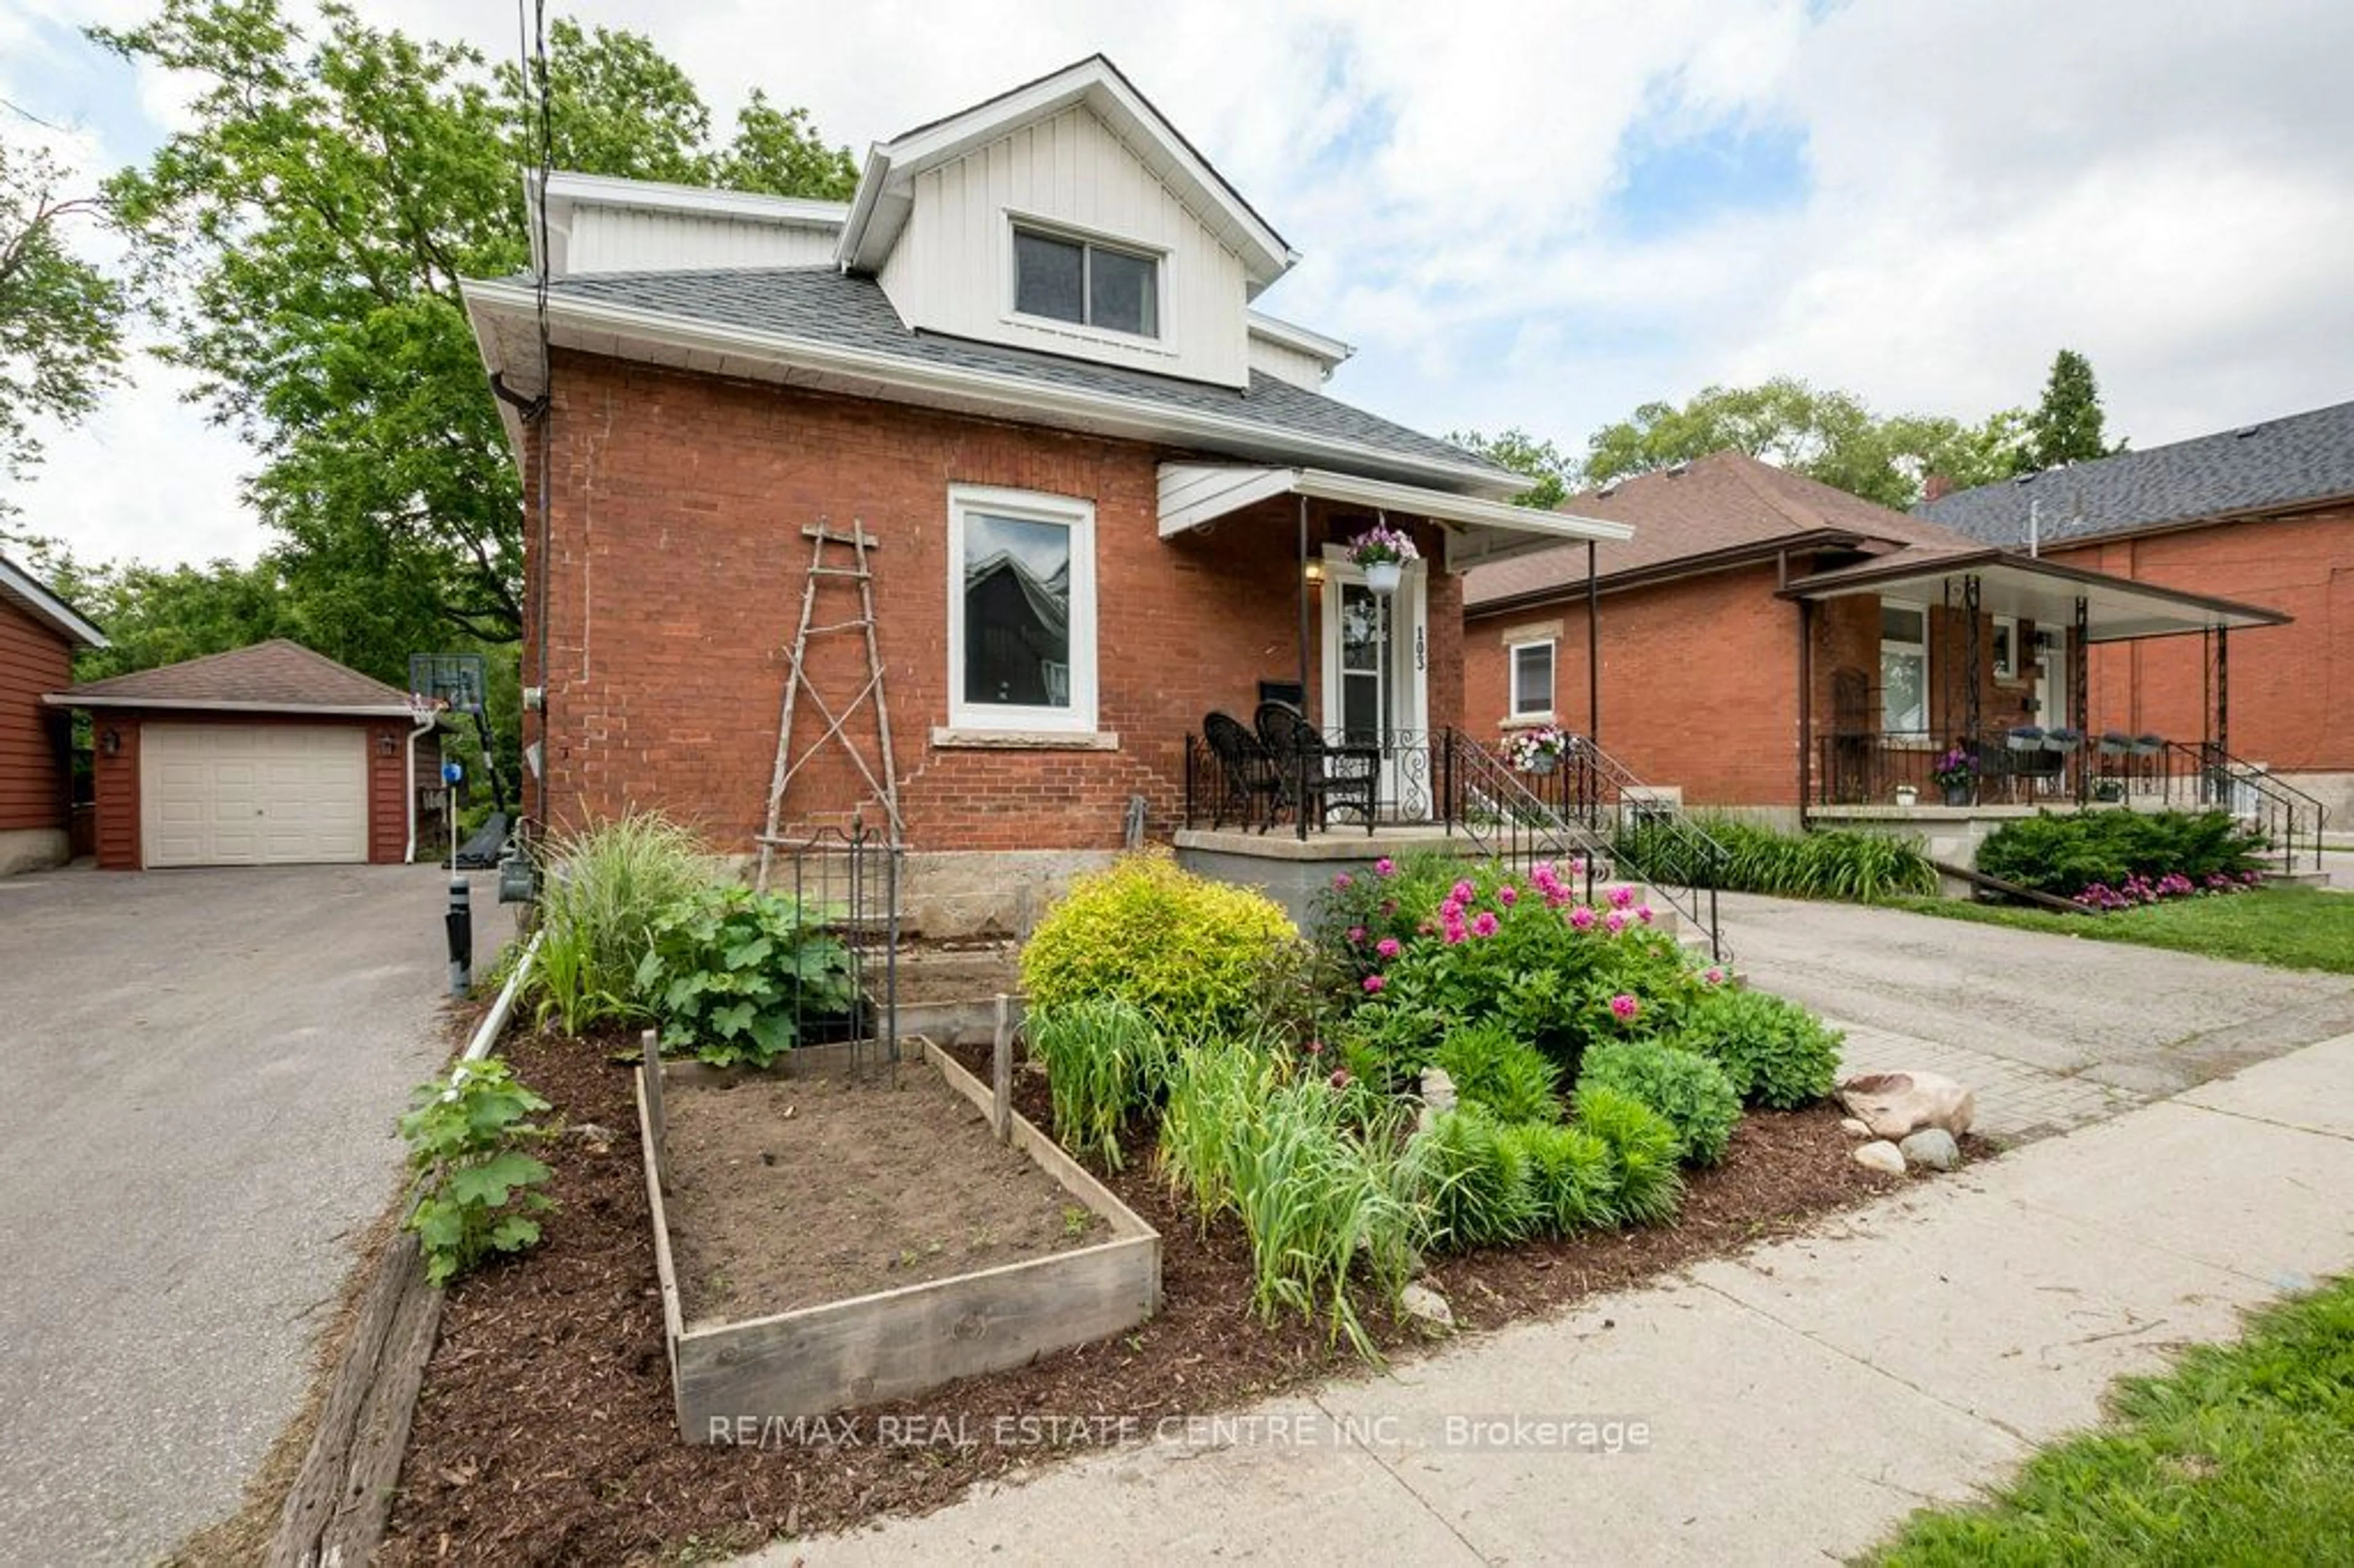 Home with brick exterior material for 103 Division St, Guelph Ontario N1H 1R7